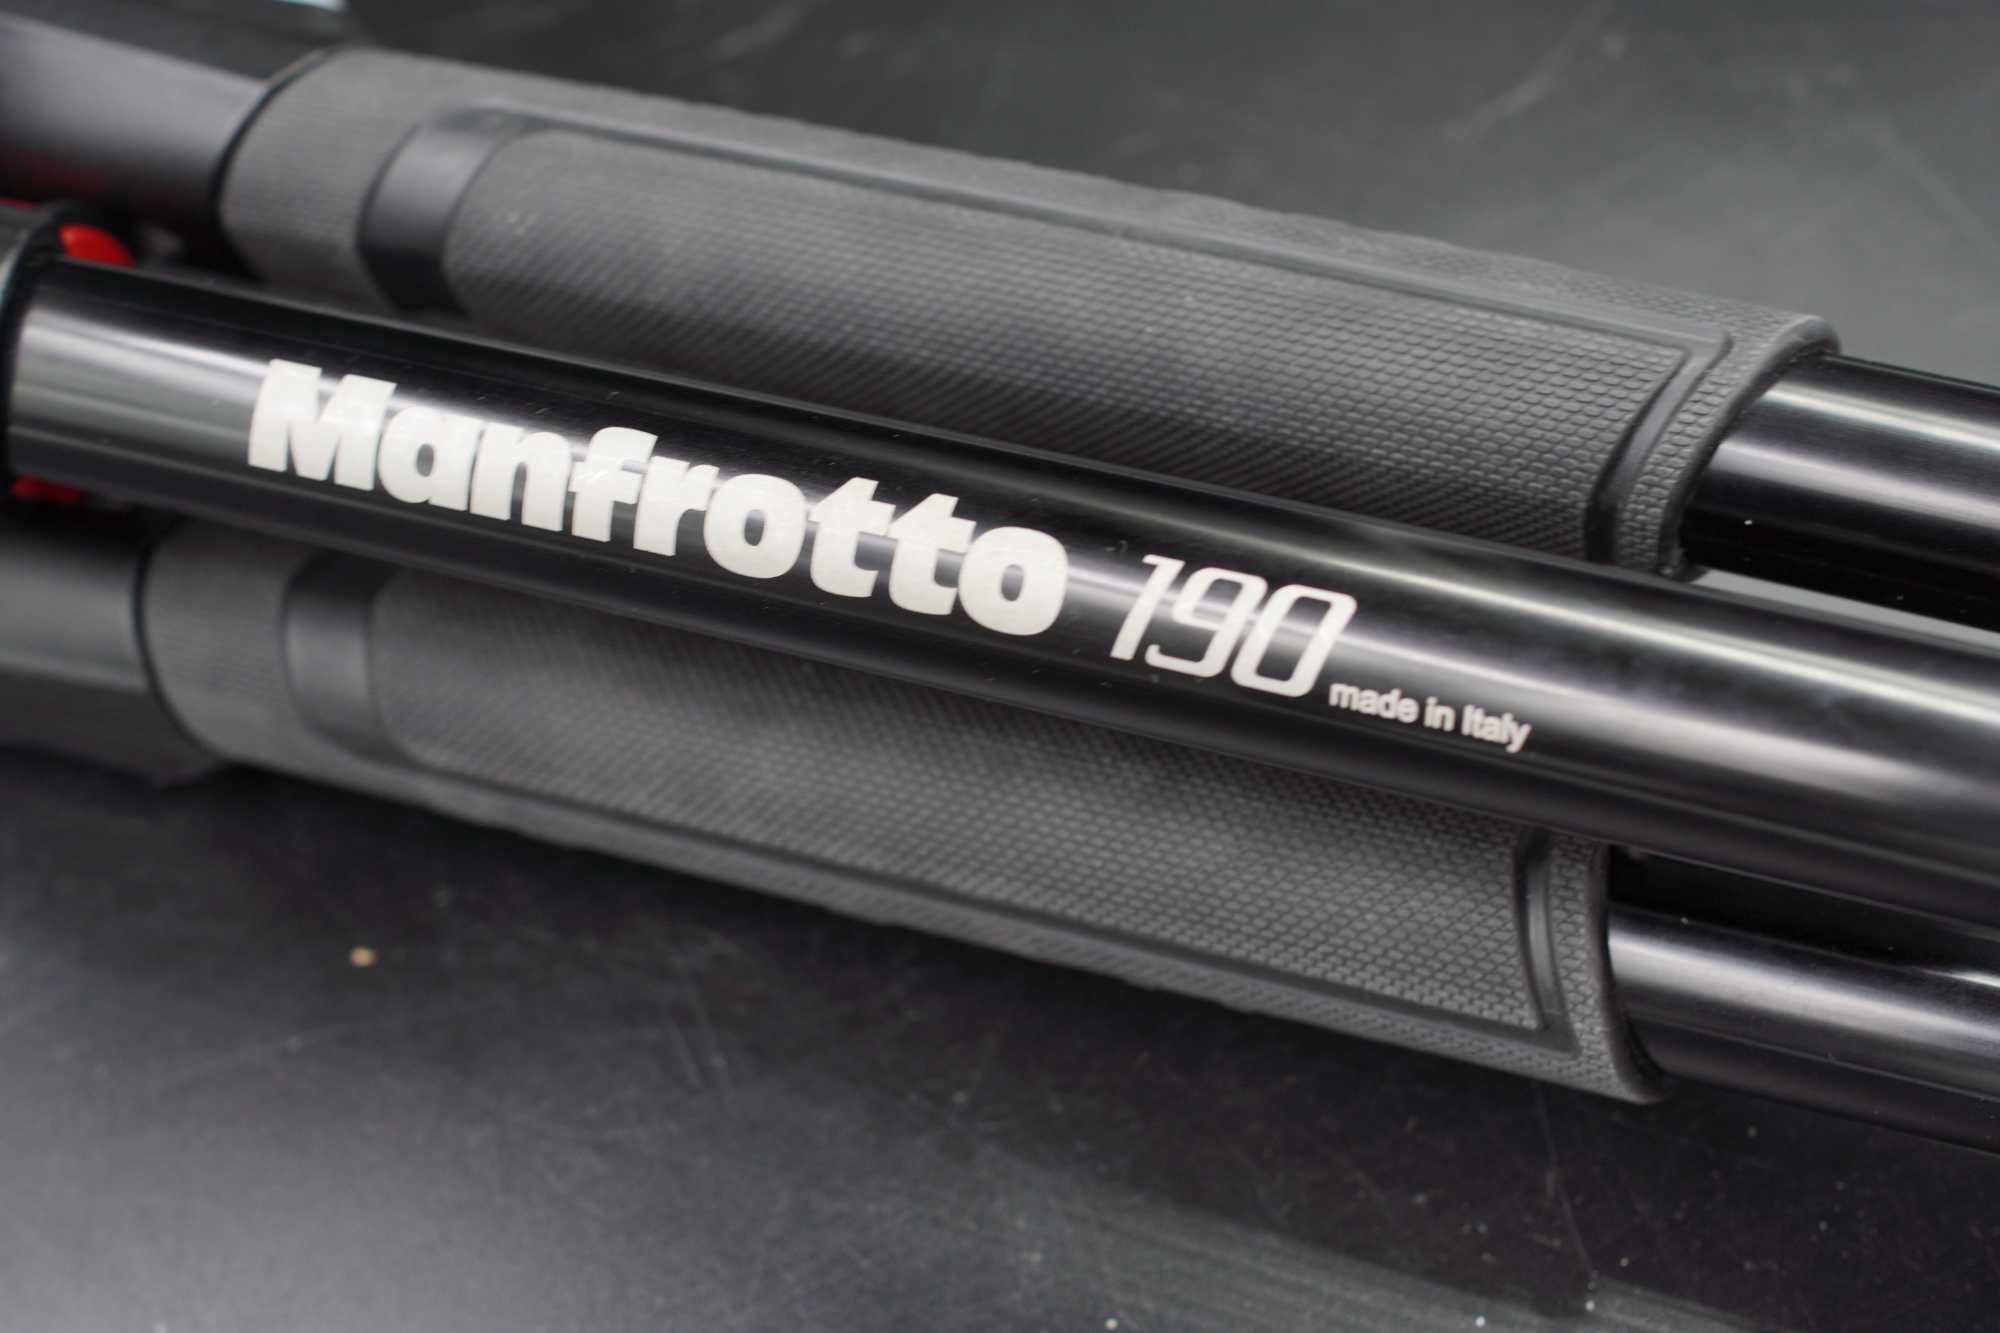 Trepied manfrotto 190